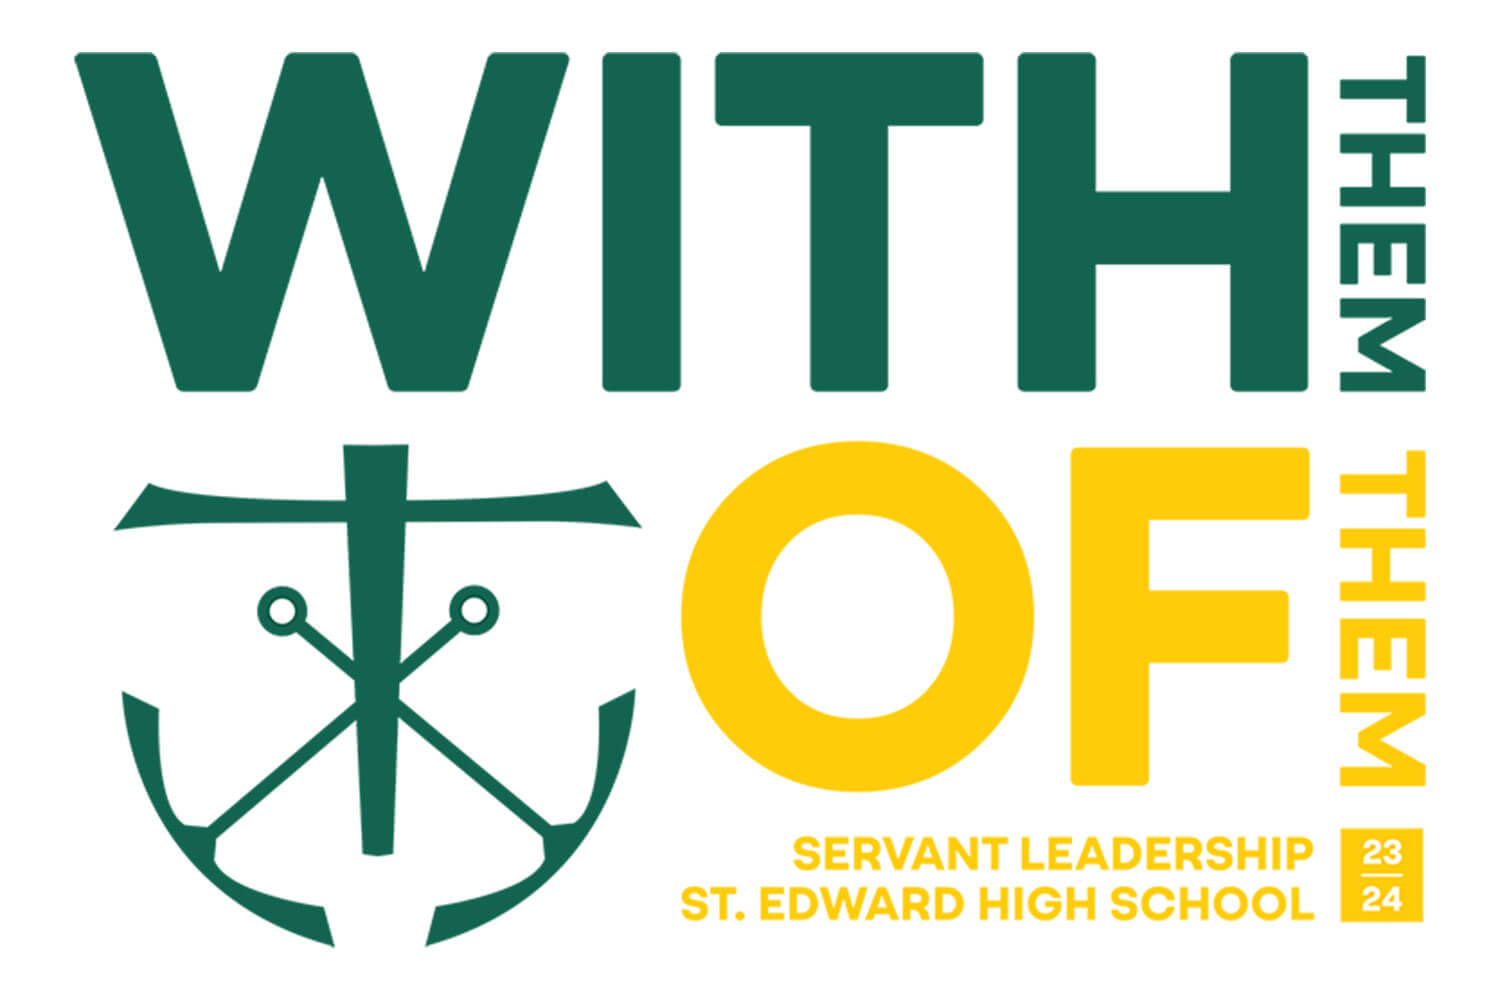 with them and of them - the school theme for 2023 centered around servant leadership